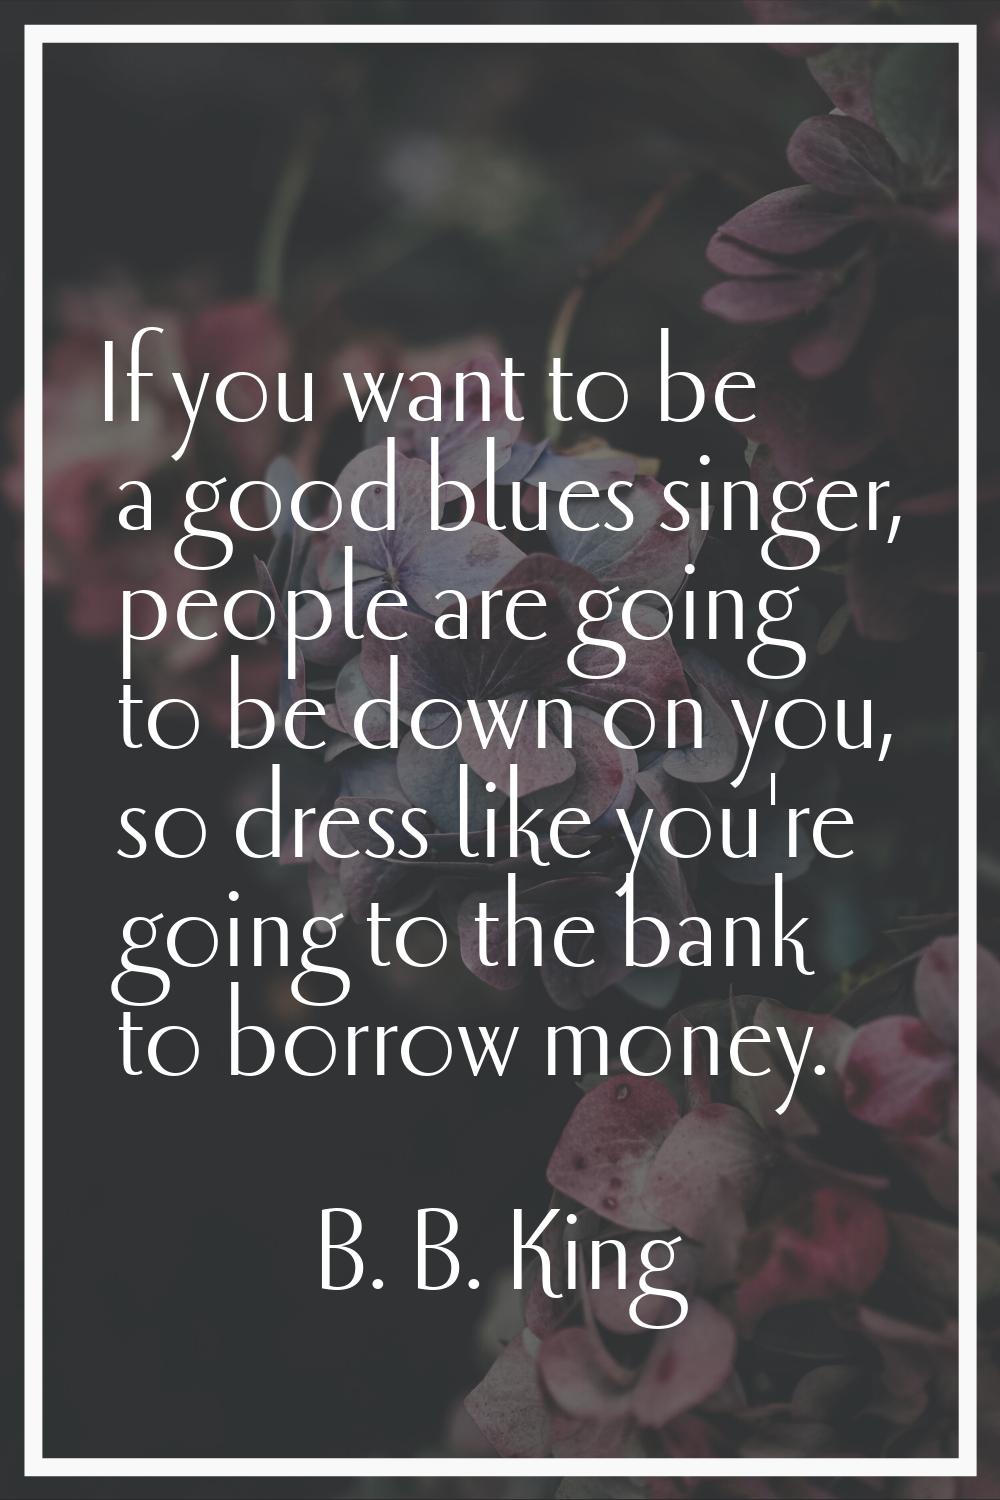 If you want to be a good blues singer, people are going to be down on you, so dress like you're goi